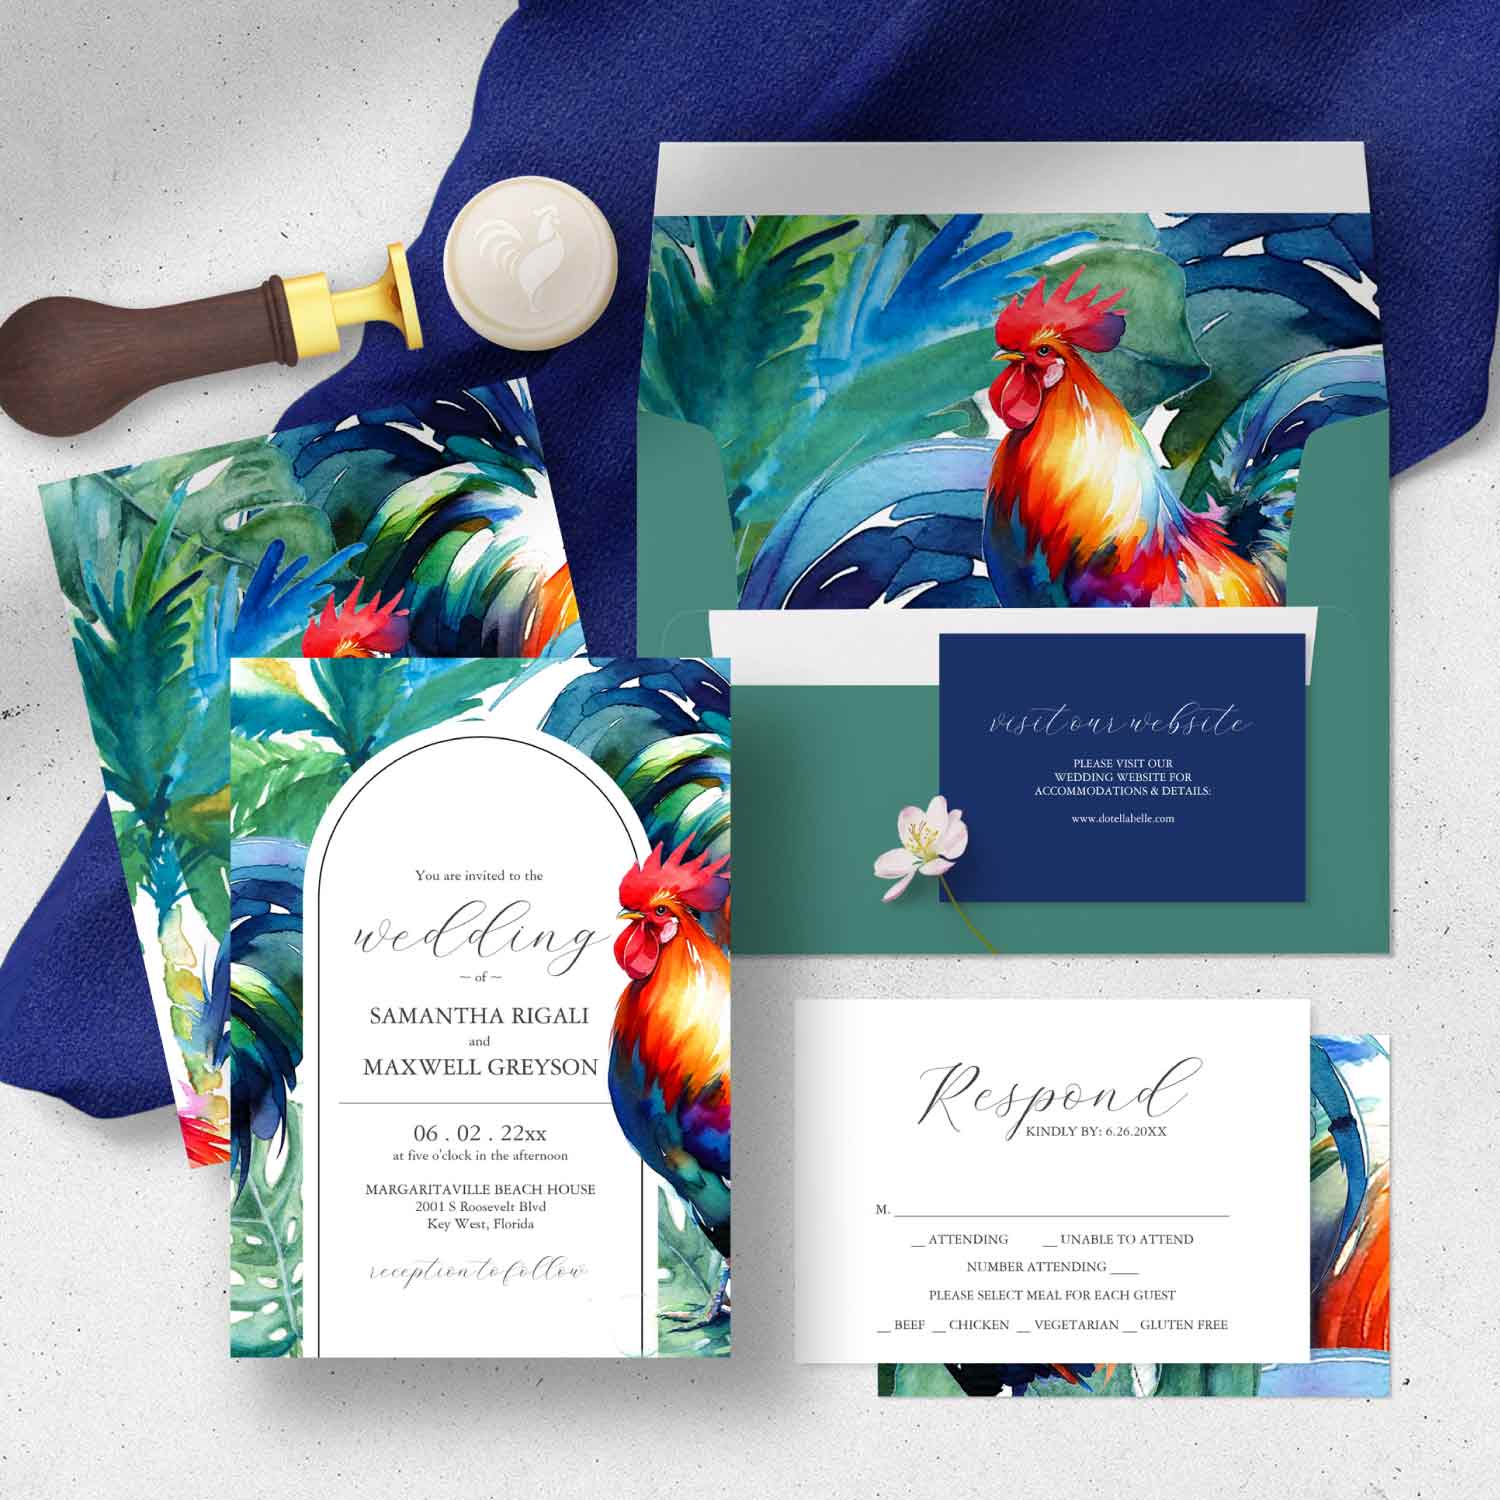 Florida keys wedding invitations theme features a watercolor rooster in vibrant shades of green and blue with a splash of red.